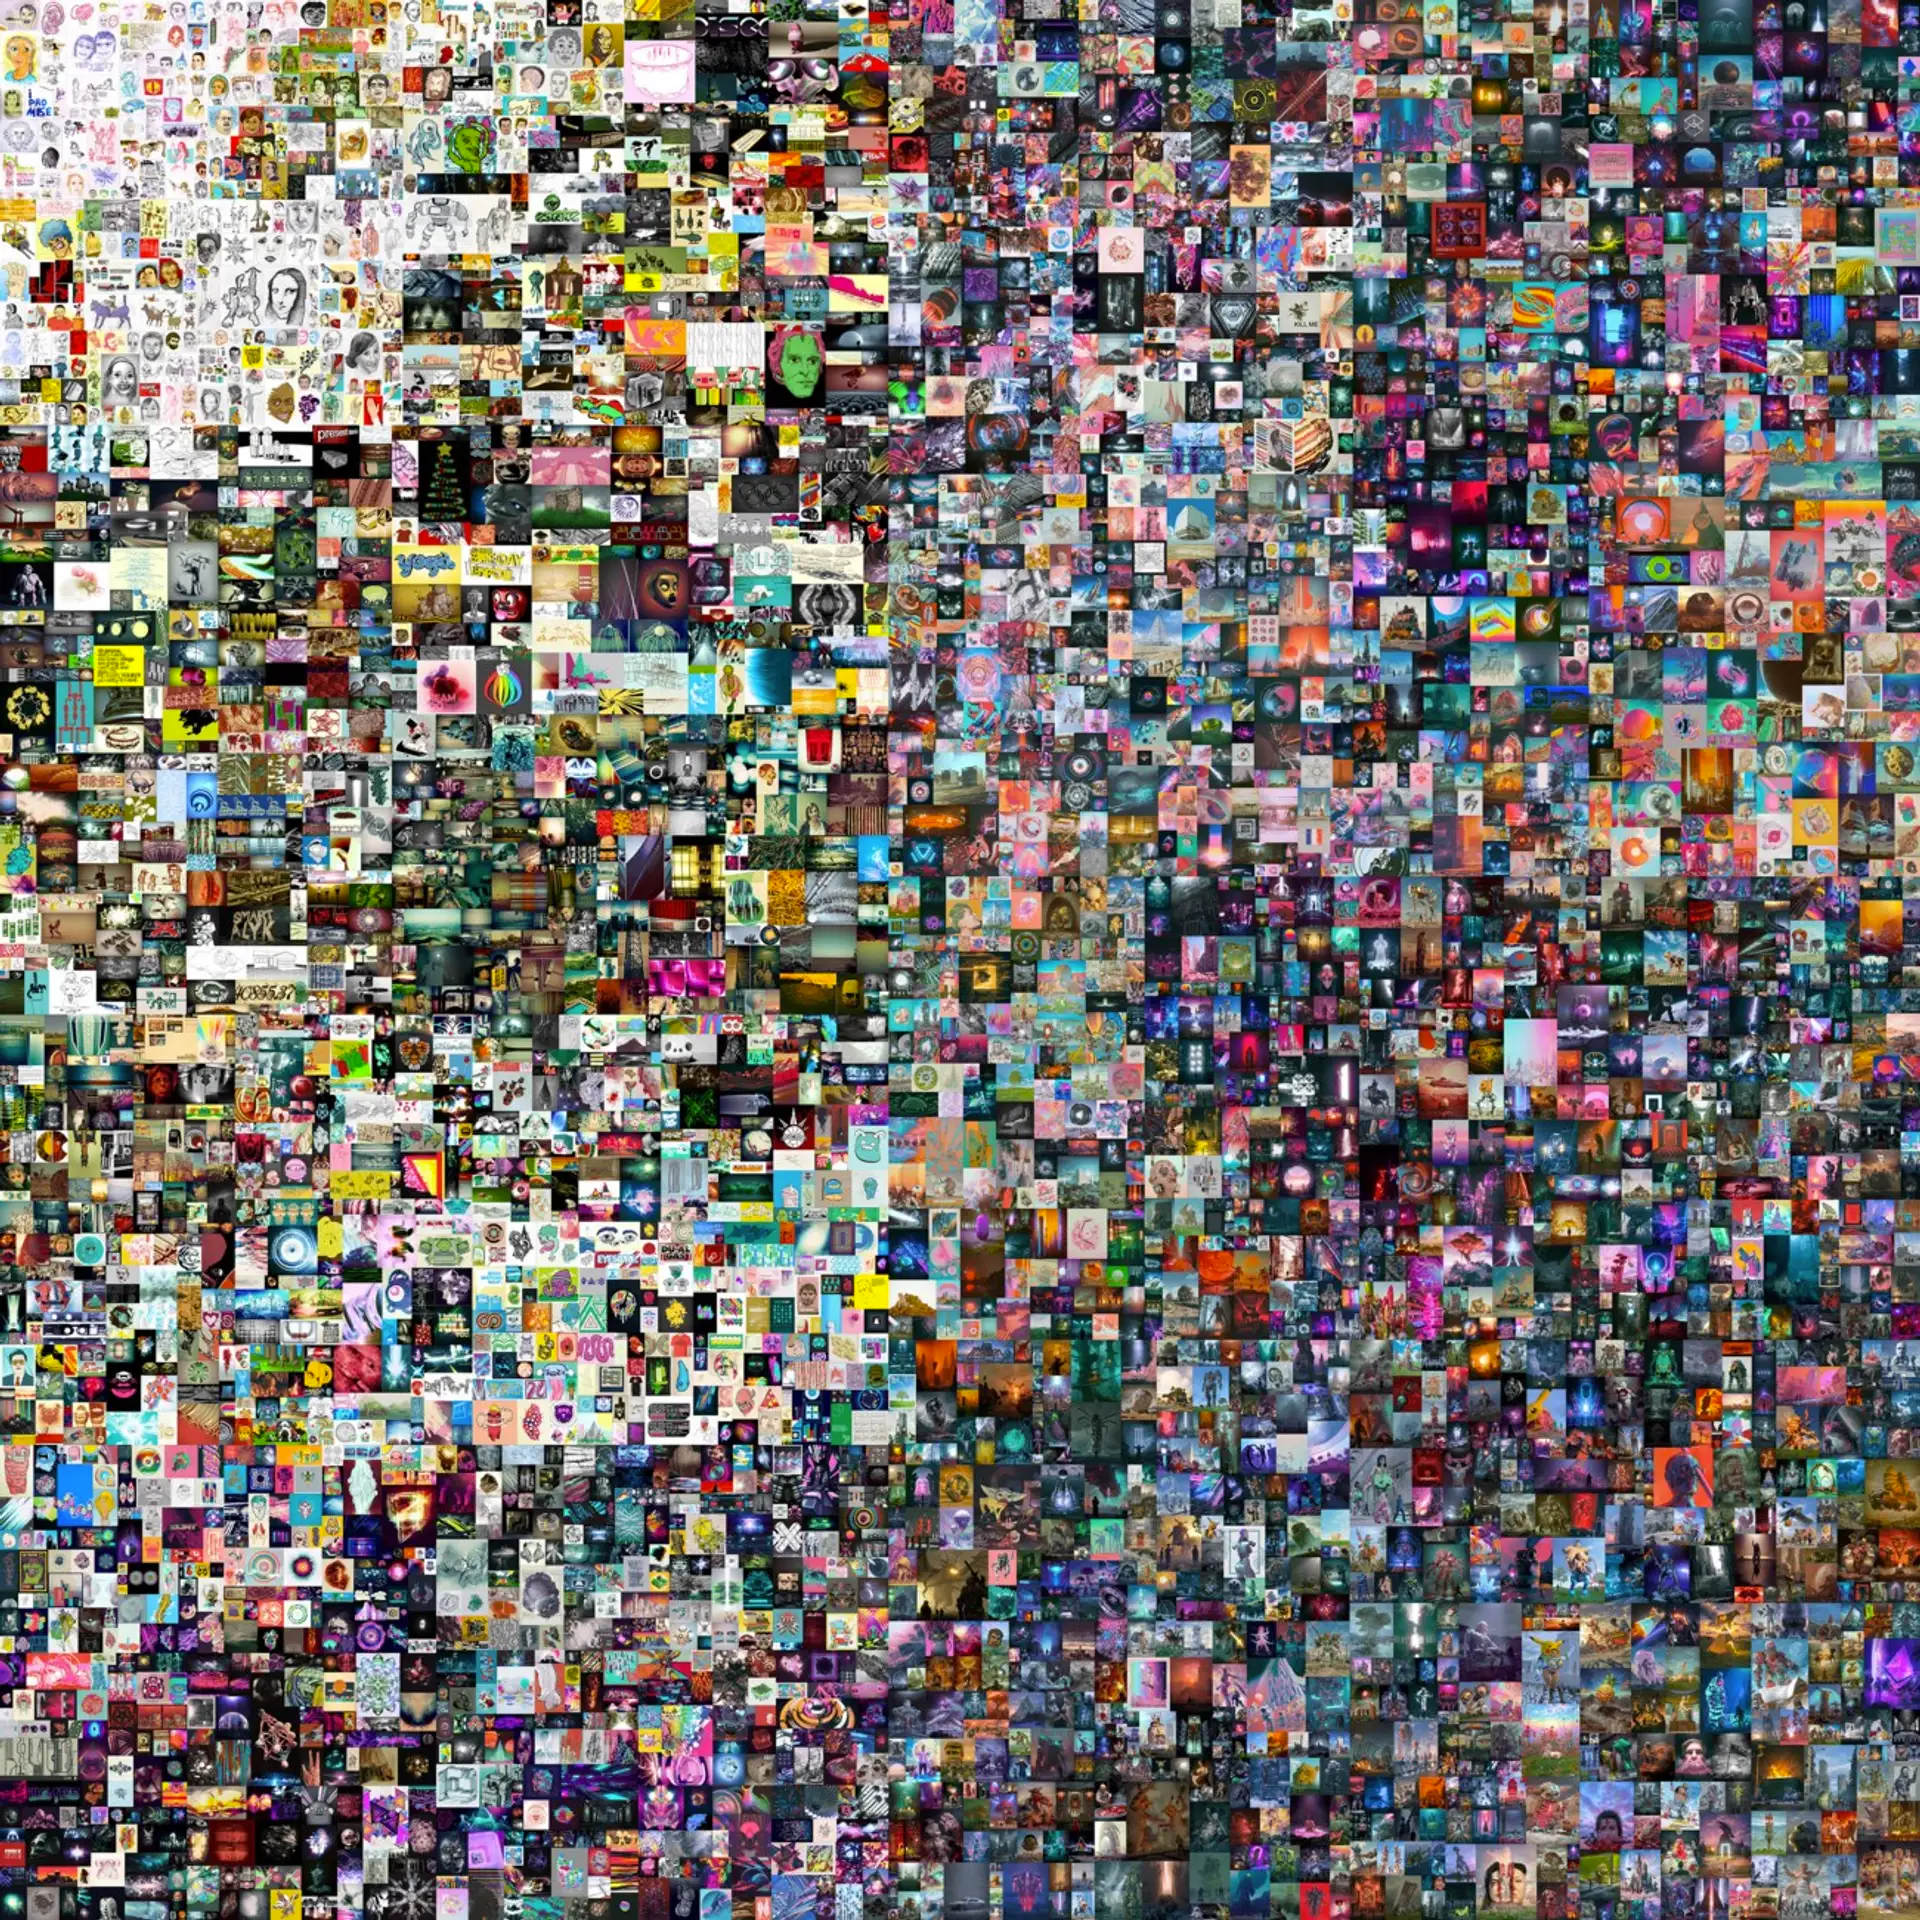 This collage shows thousands of small photographs of people, assembled together until barely distinguishable.